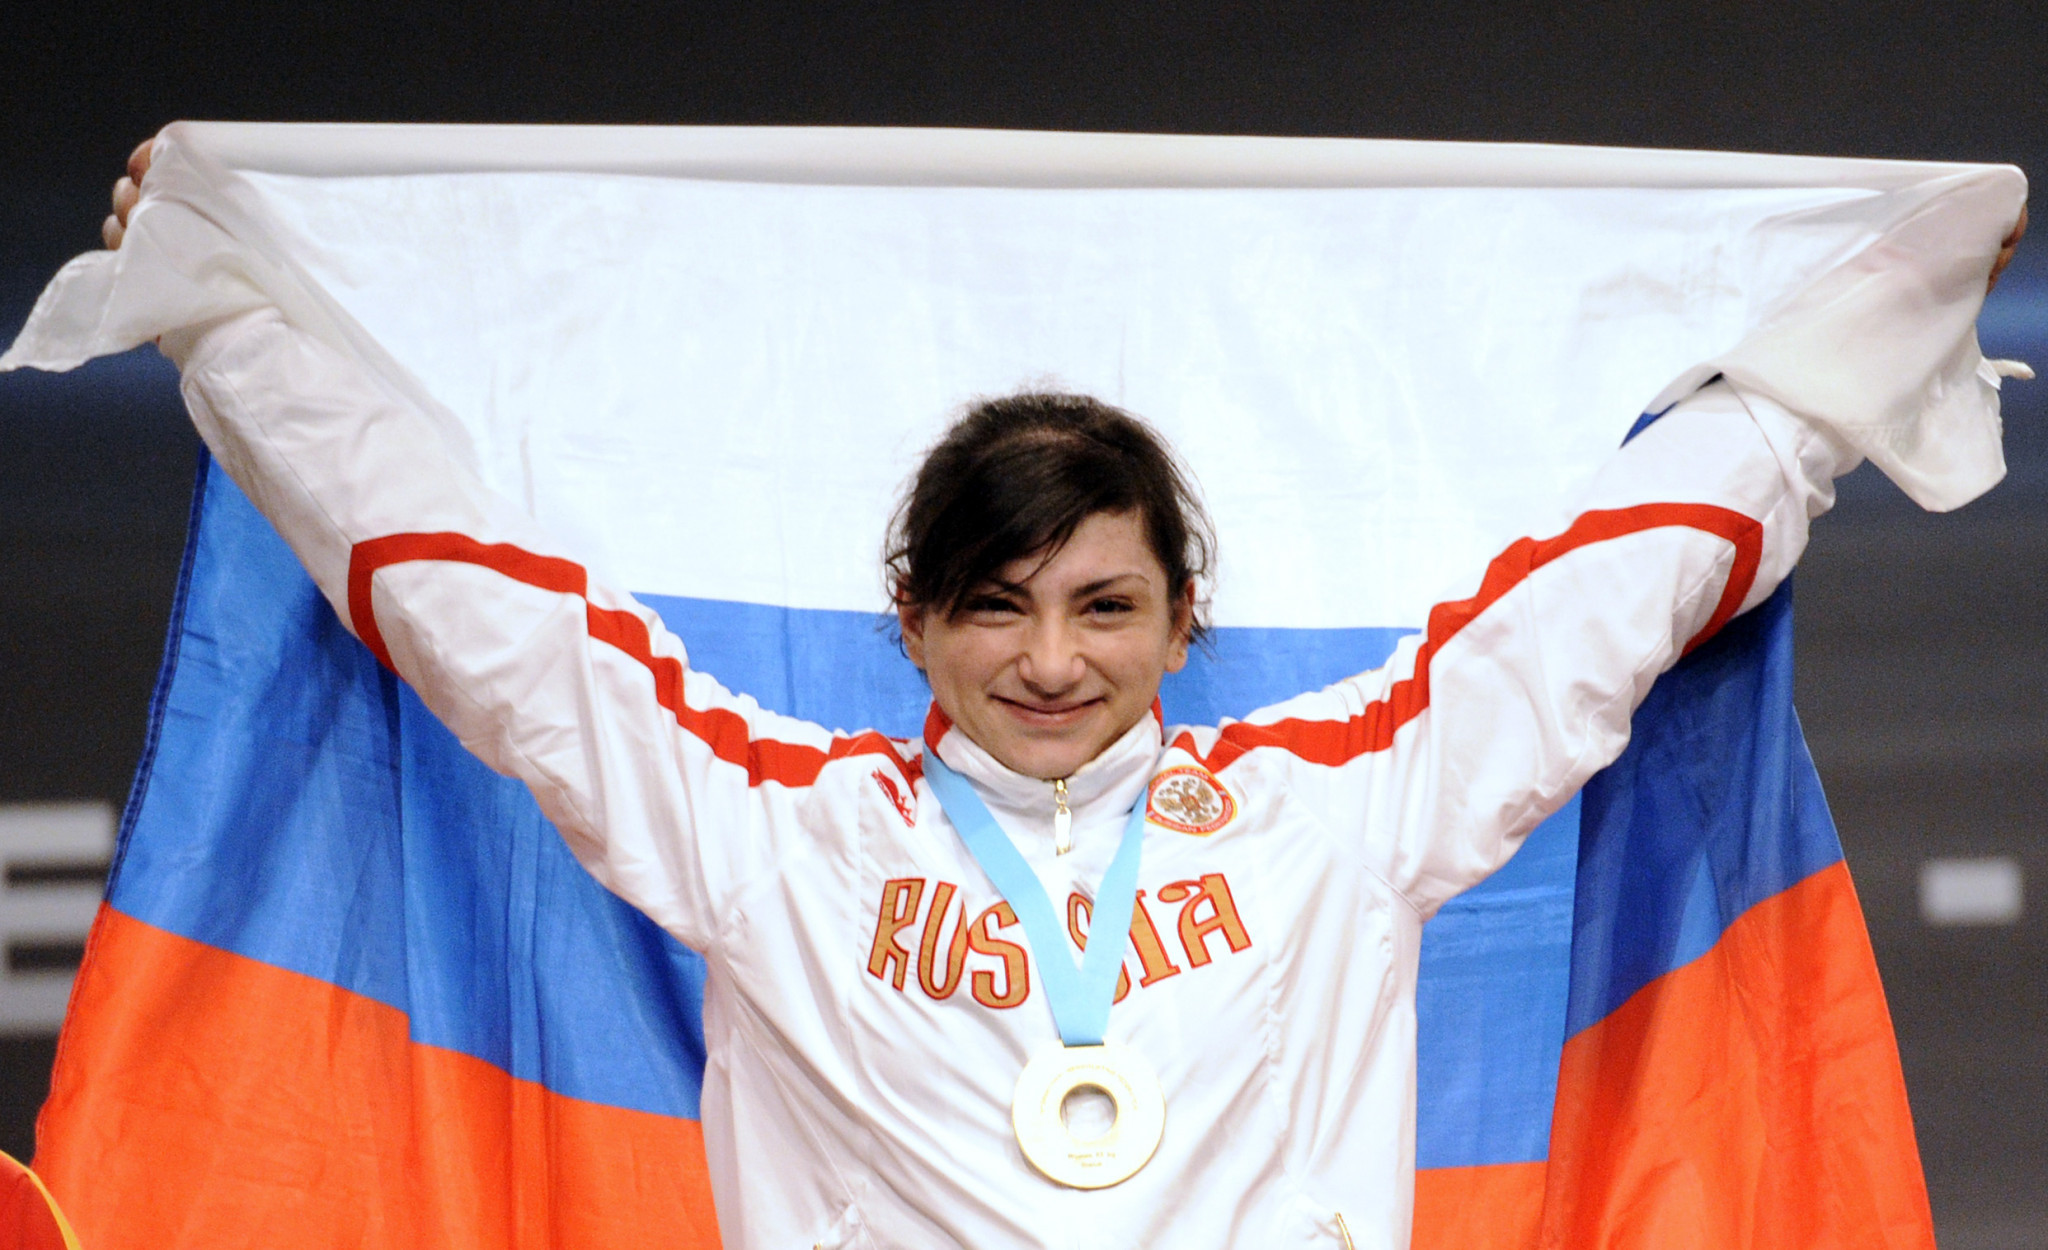 Svetlana Tsarukayeva has been banned from the sport for two years, despite not having competed since 2012 ©Getty Images